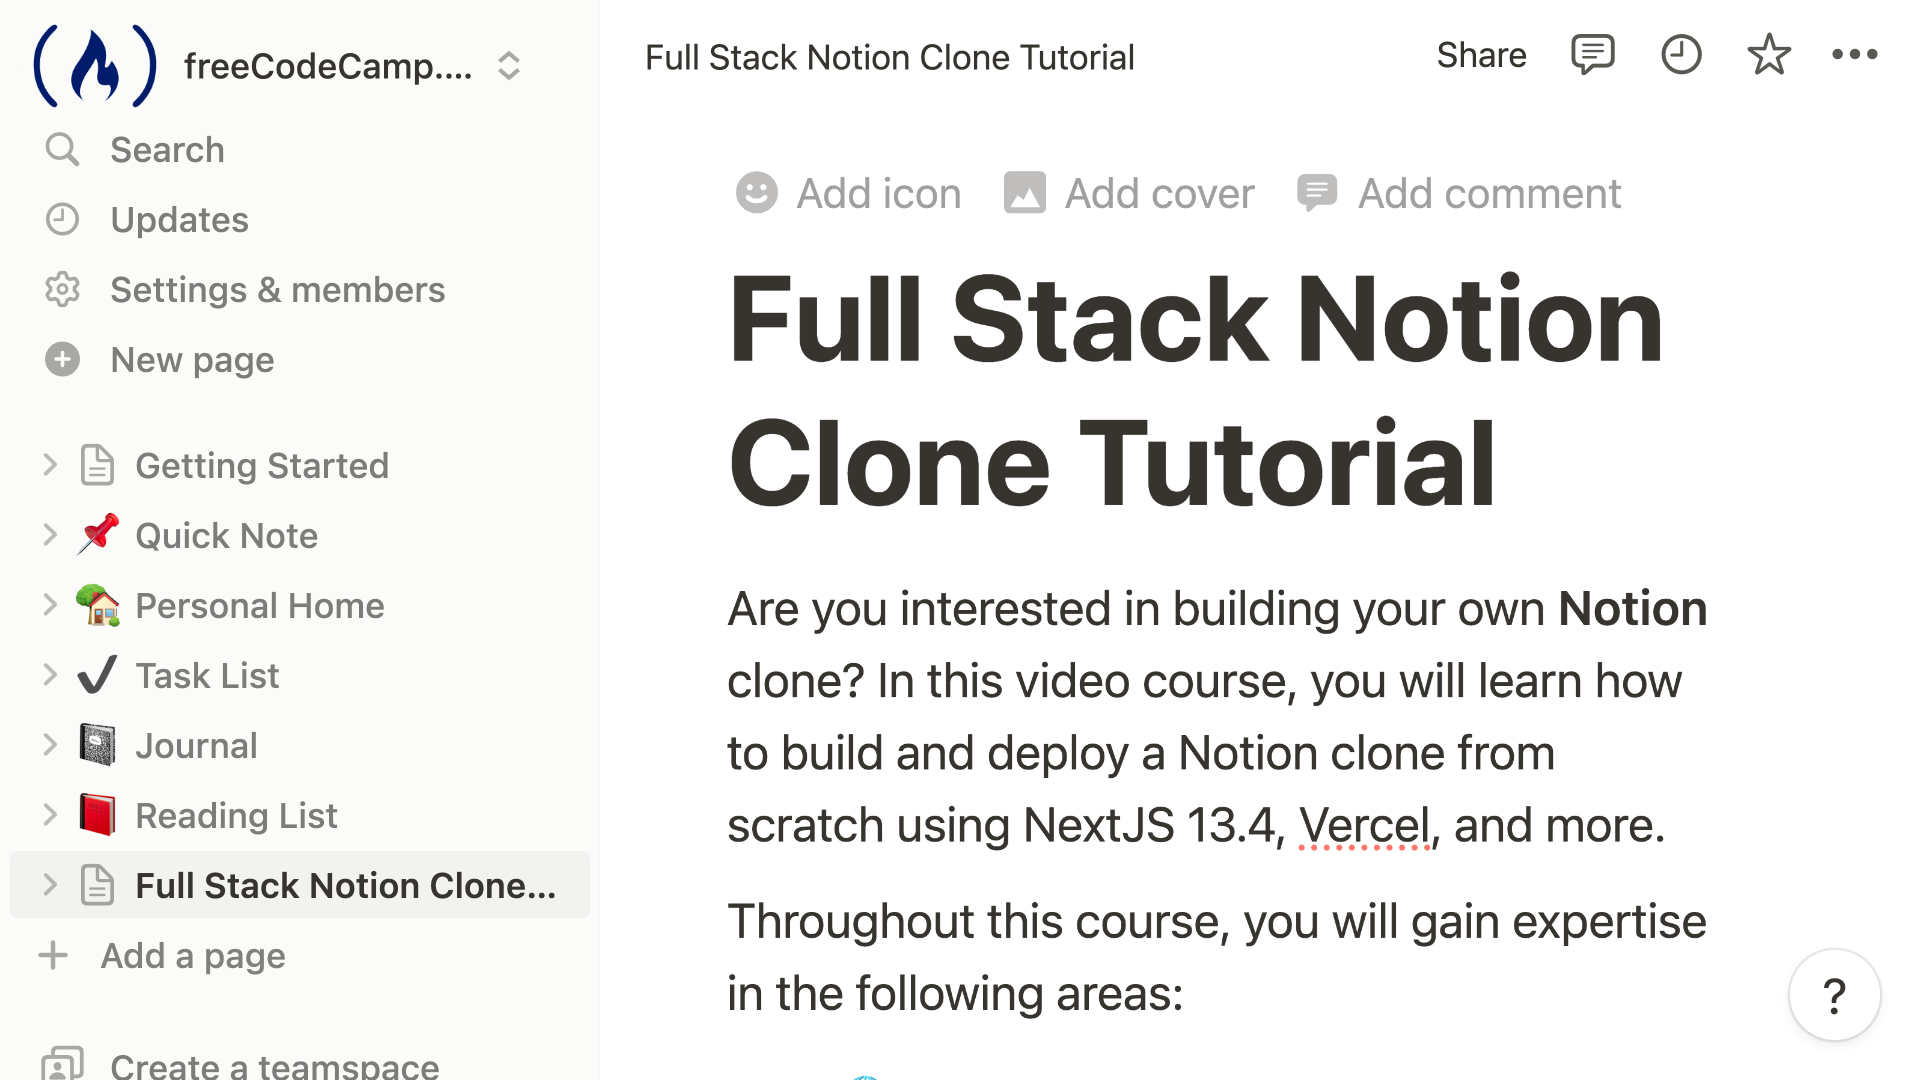 Image for Build and Deploy a Full Stack Notion Clone with Next.js, DALL-E, Vercel